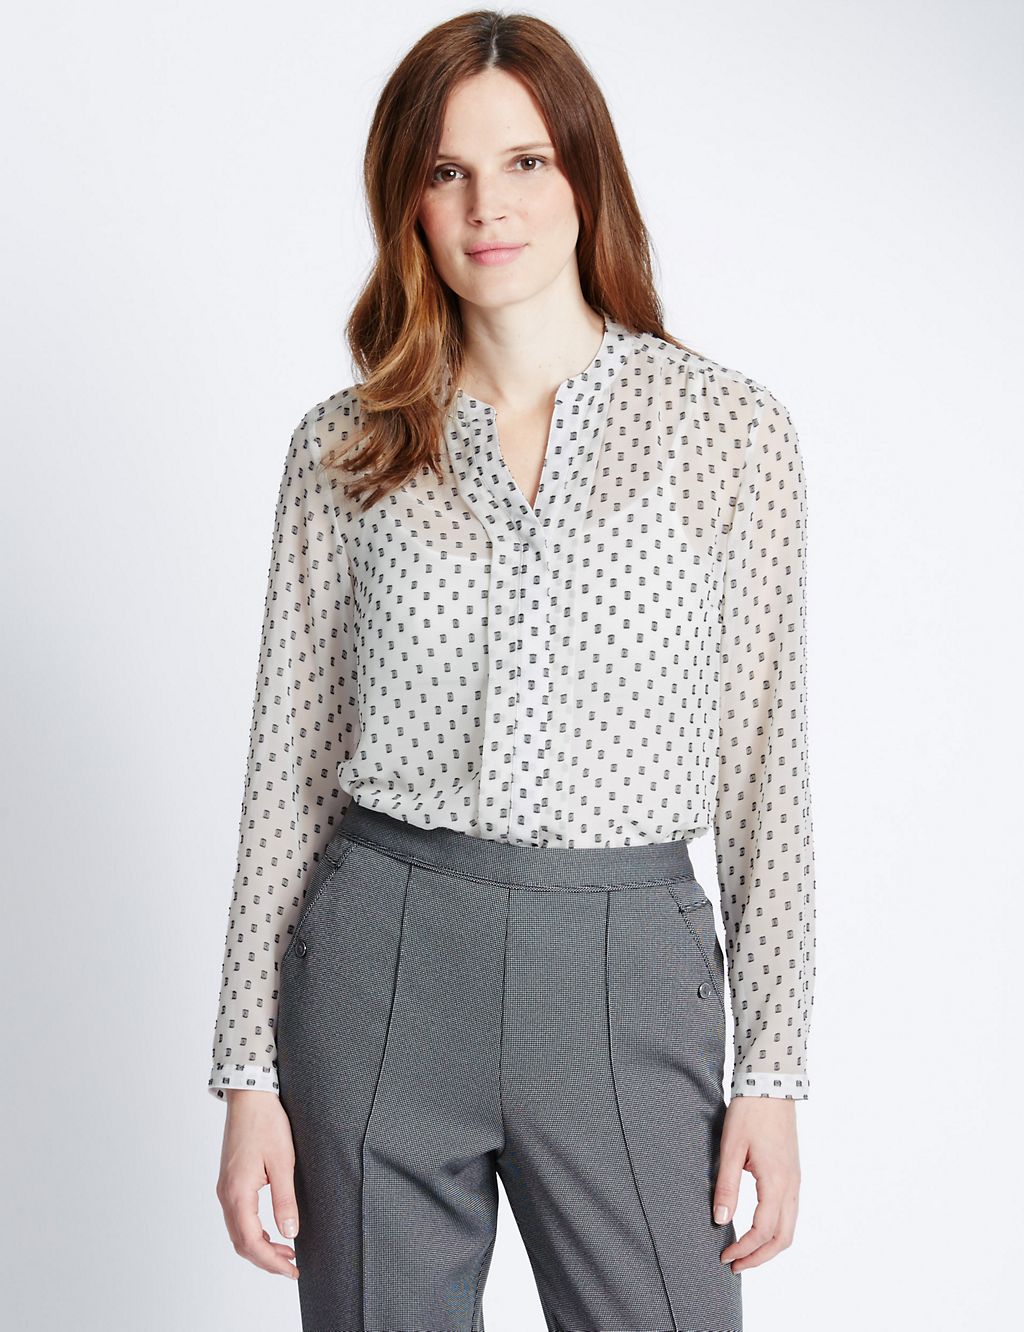 Clipped Blouse with Camisole 3 of 4